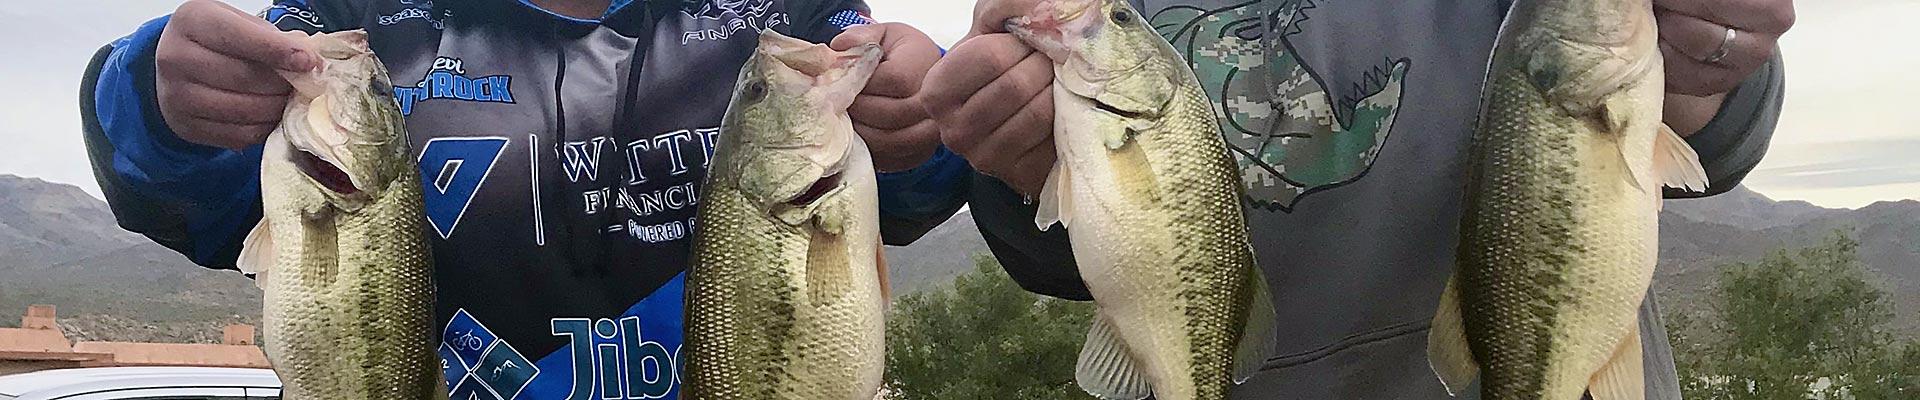 Chatterbait and Spook Fishing, College Level